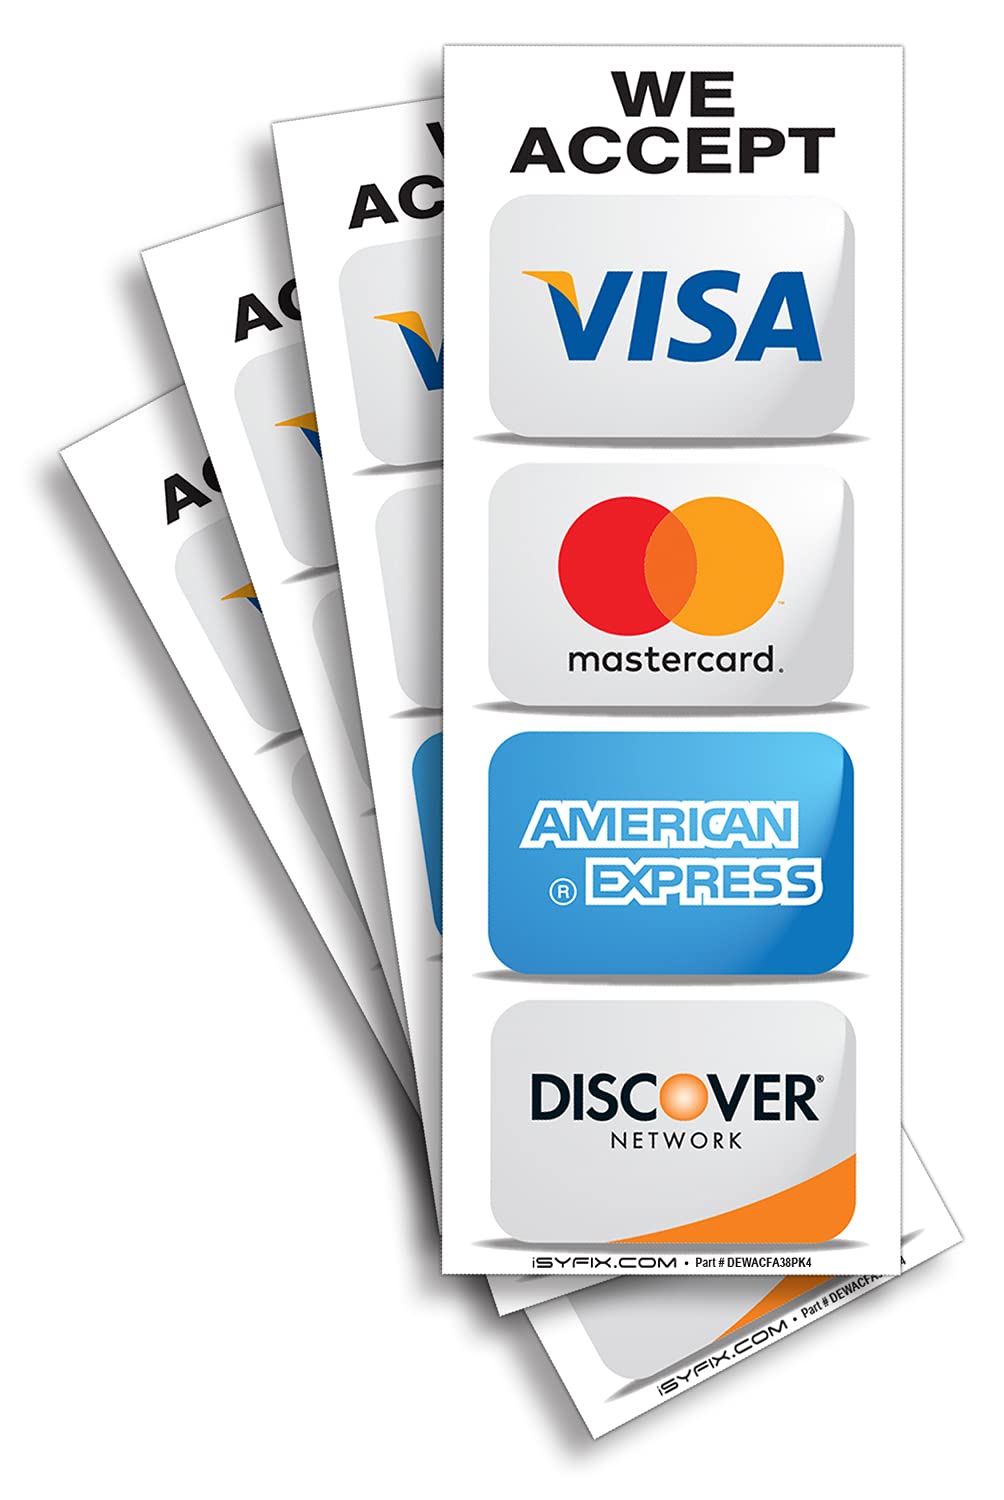  [AUSTRALIA] - Credit Card Sticker Signs Stickers for Windows – 4 Pack 3”x 8” Inch - We Accept Visa, MasterCard, Amex & Discover, Premium Front Adhesive Vinyl to Apply Inside The Window or Glass Door for Stores Business